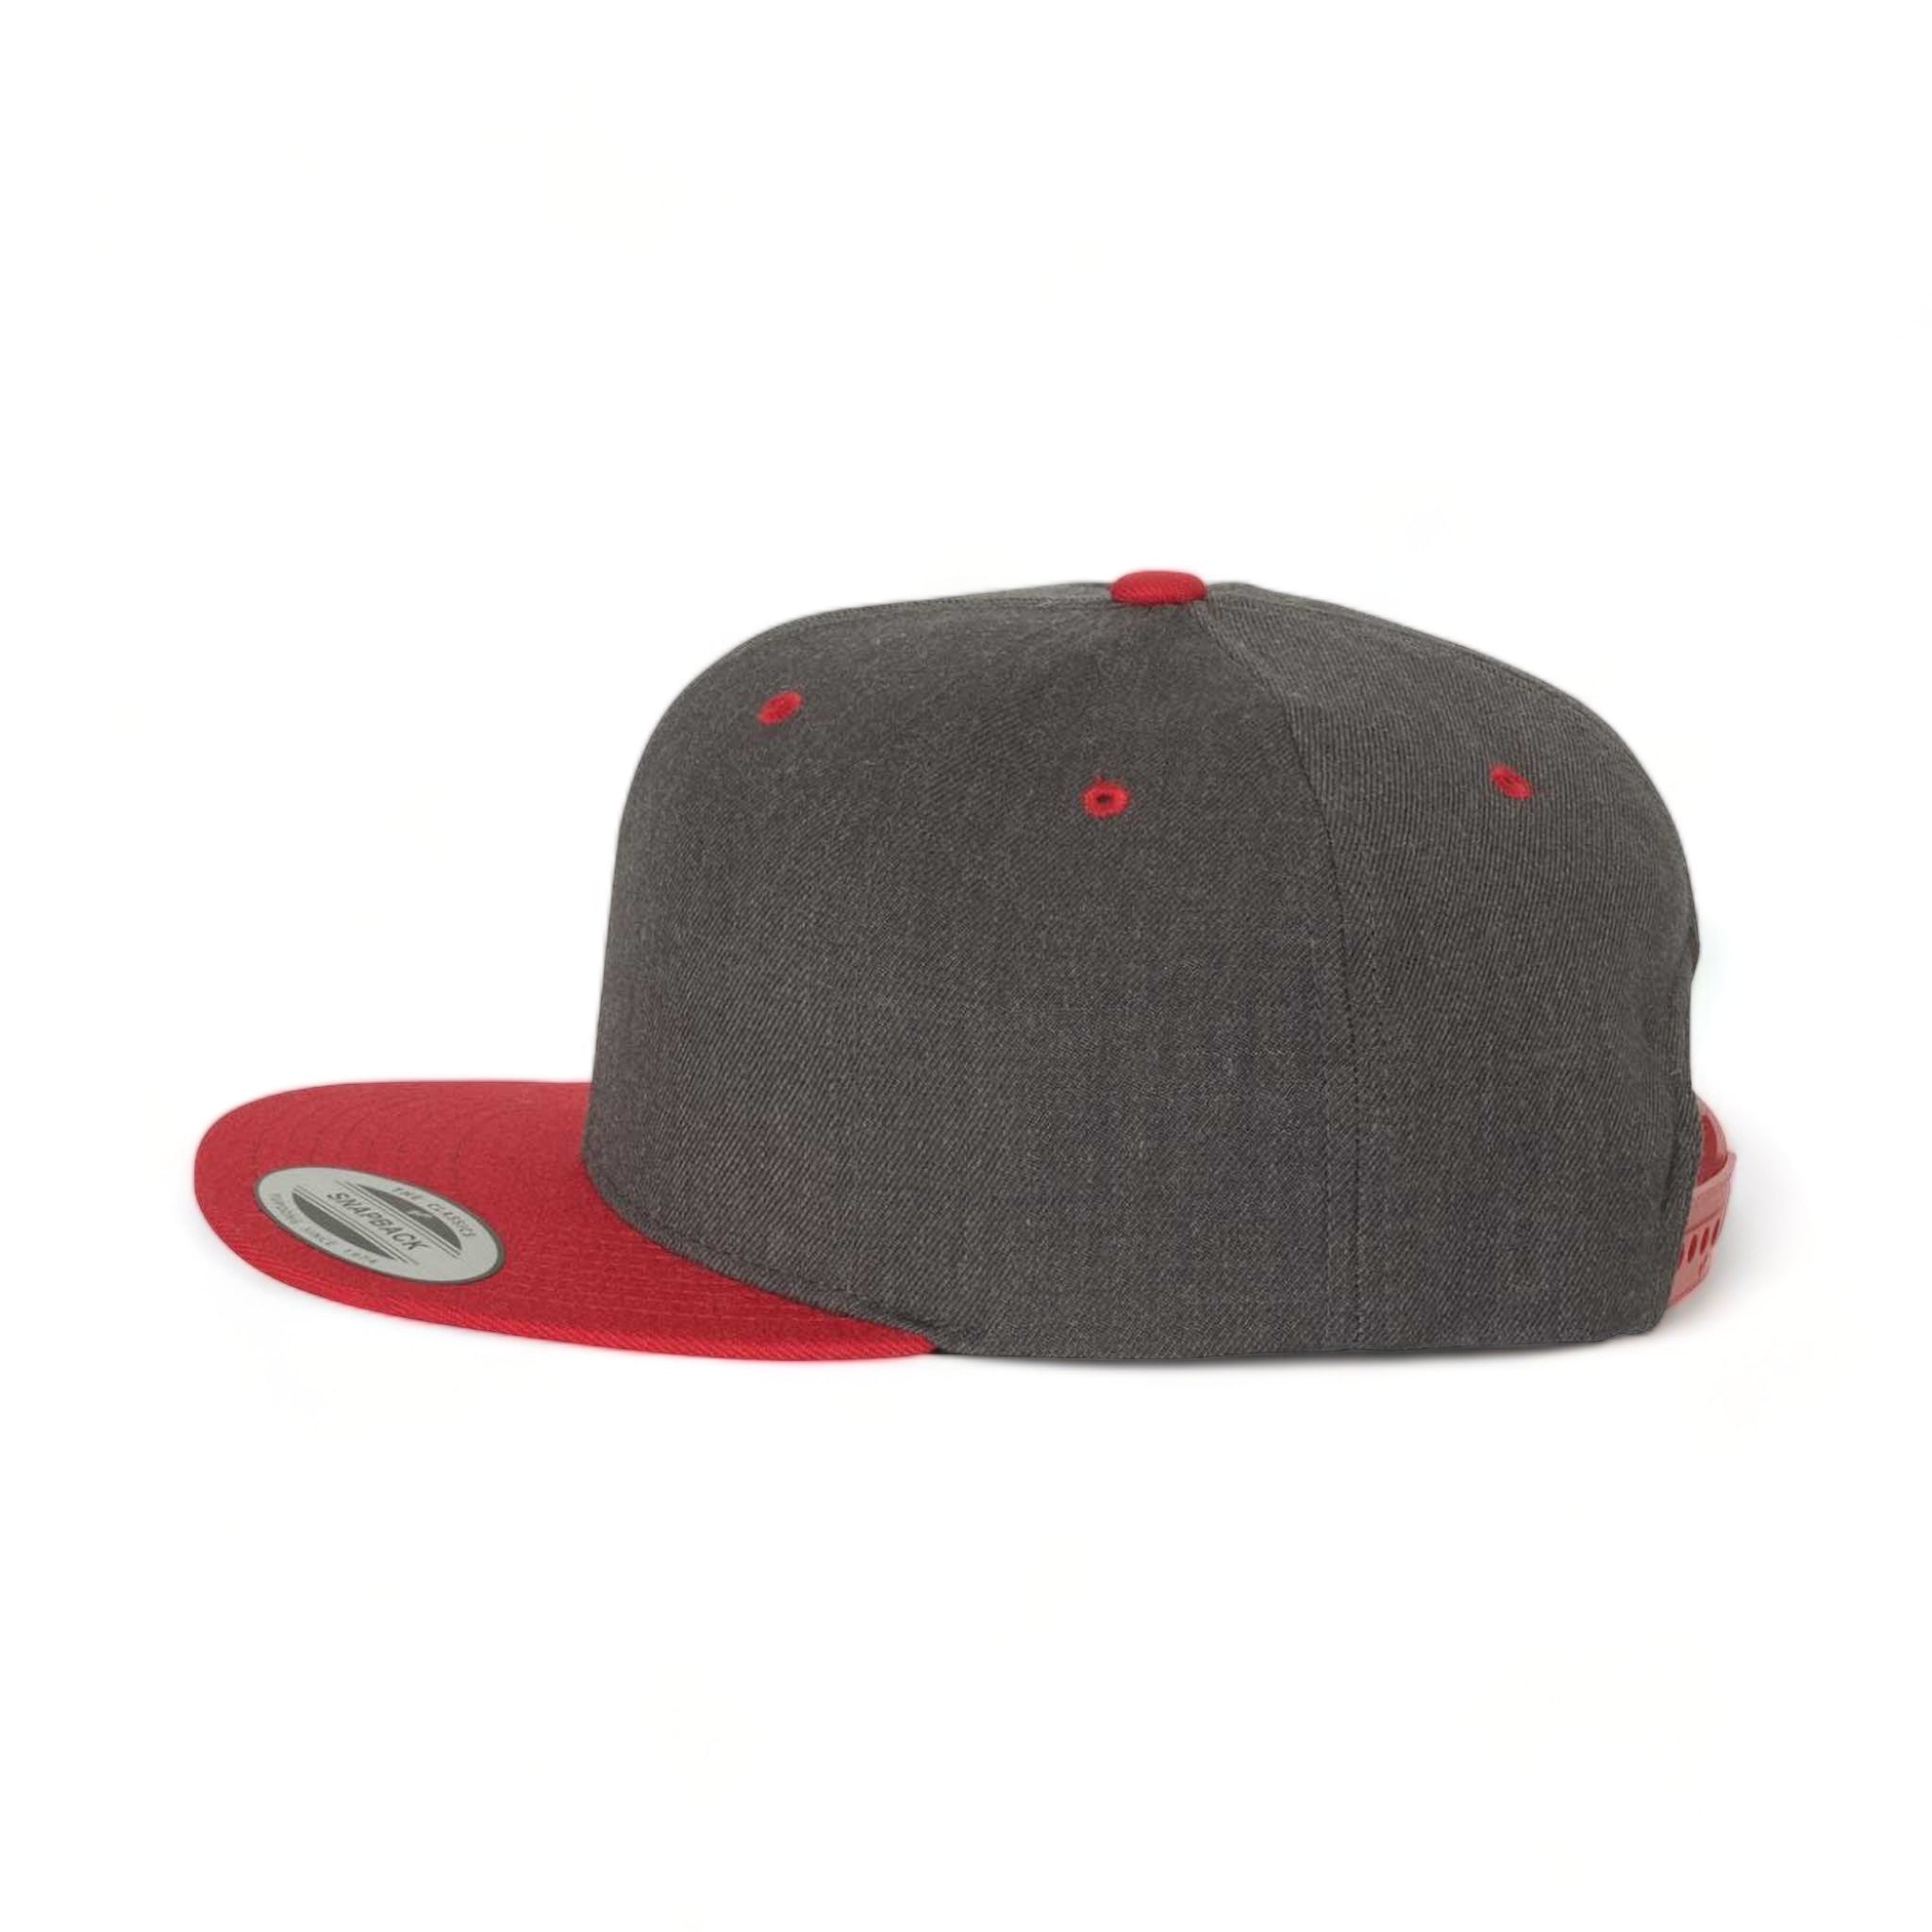 Side view of YP Classics 6089M custom hat in dark heather and red